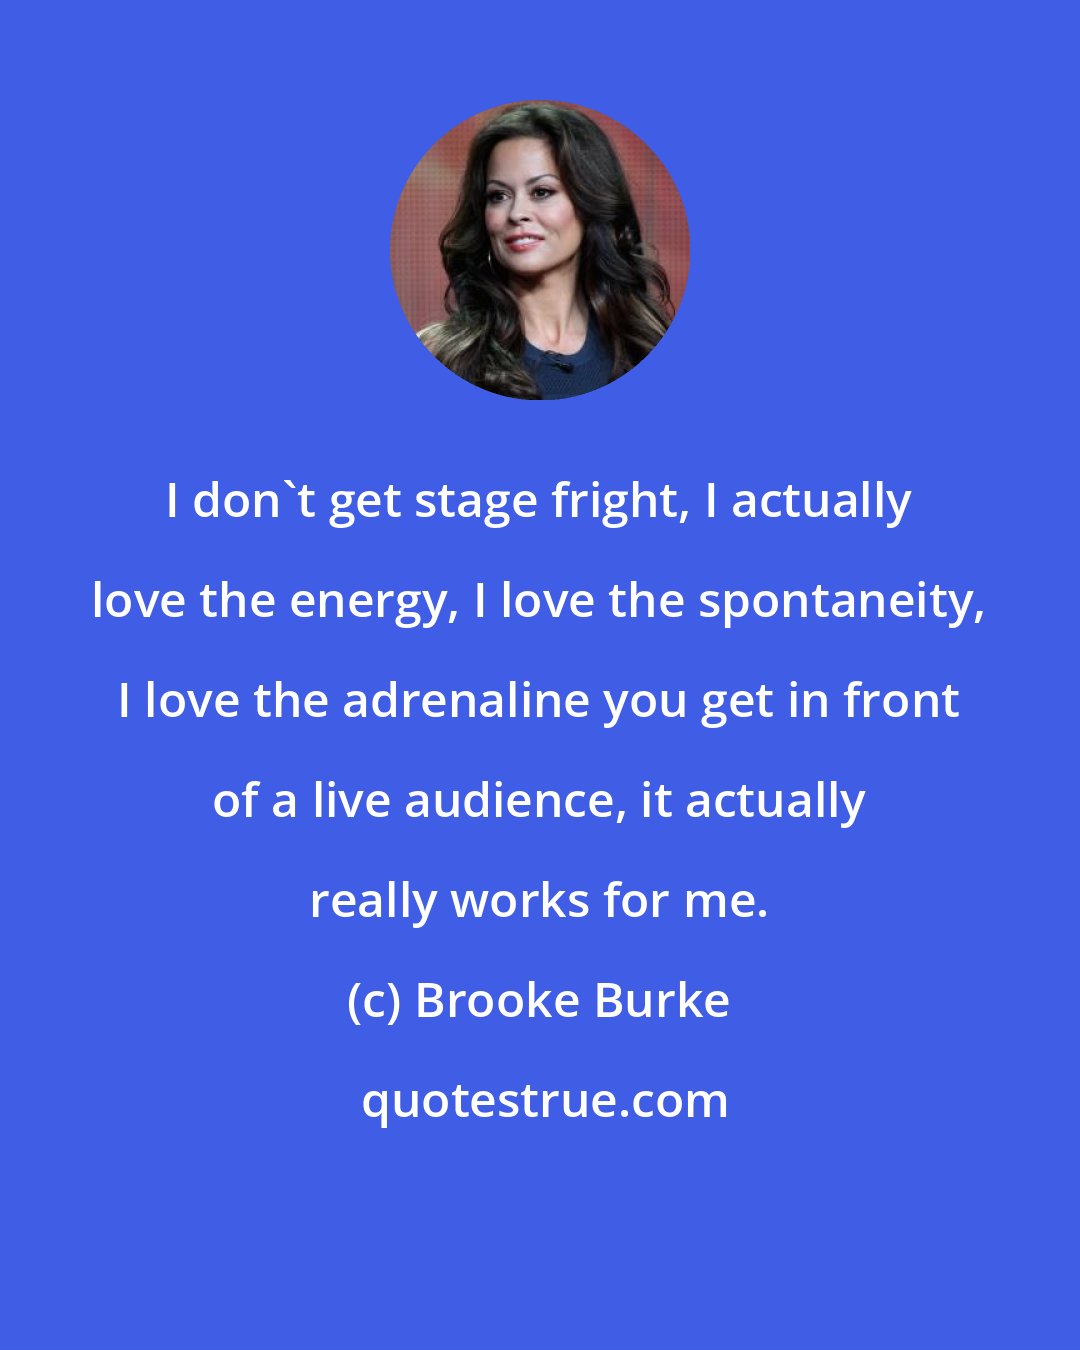 Brooke Burke: I don't get stage fright, I actually love the energy, I love the spontaneity, I love the adrenaline you get in front of a live audience, it actually really works for me.